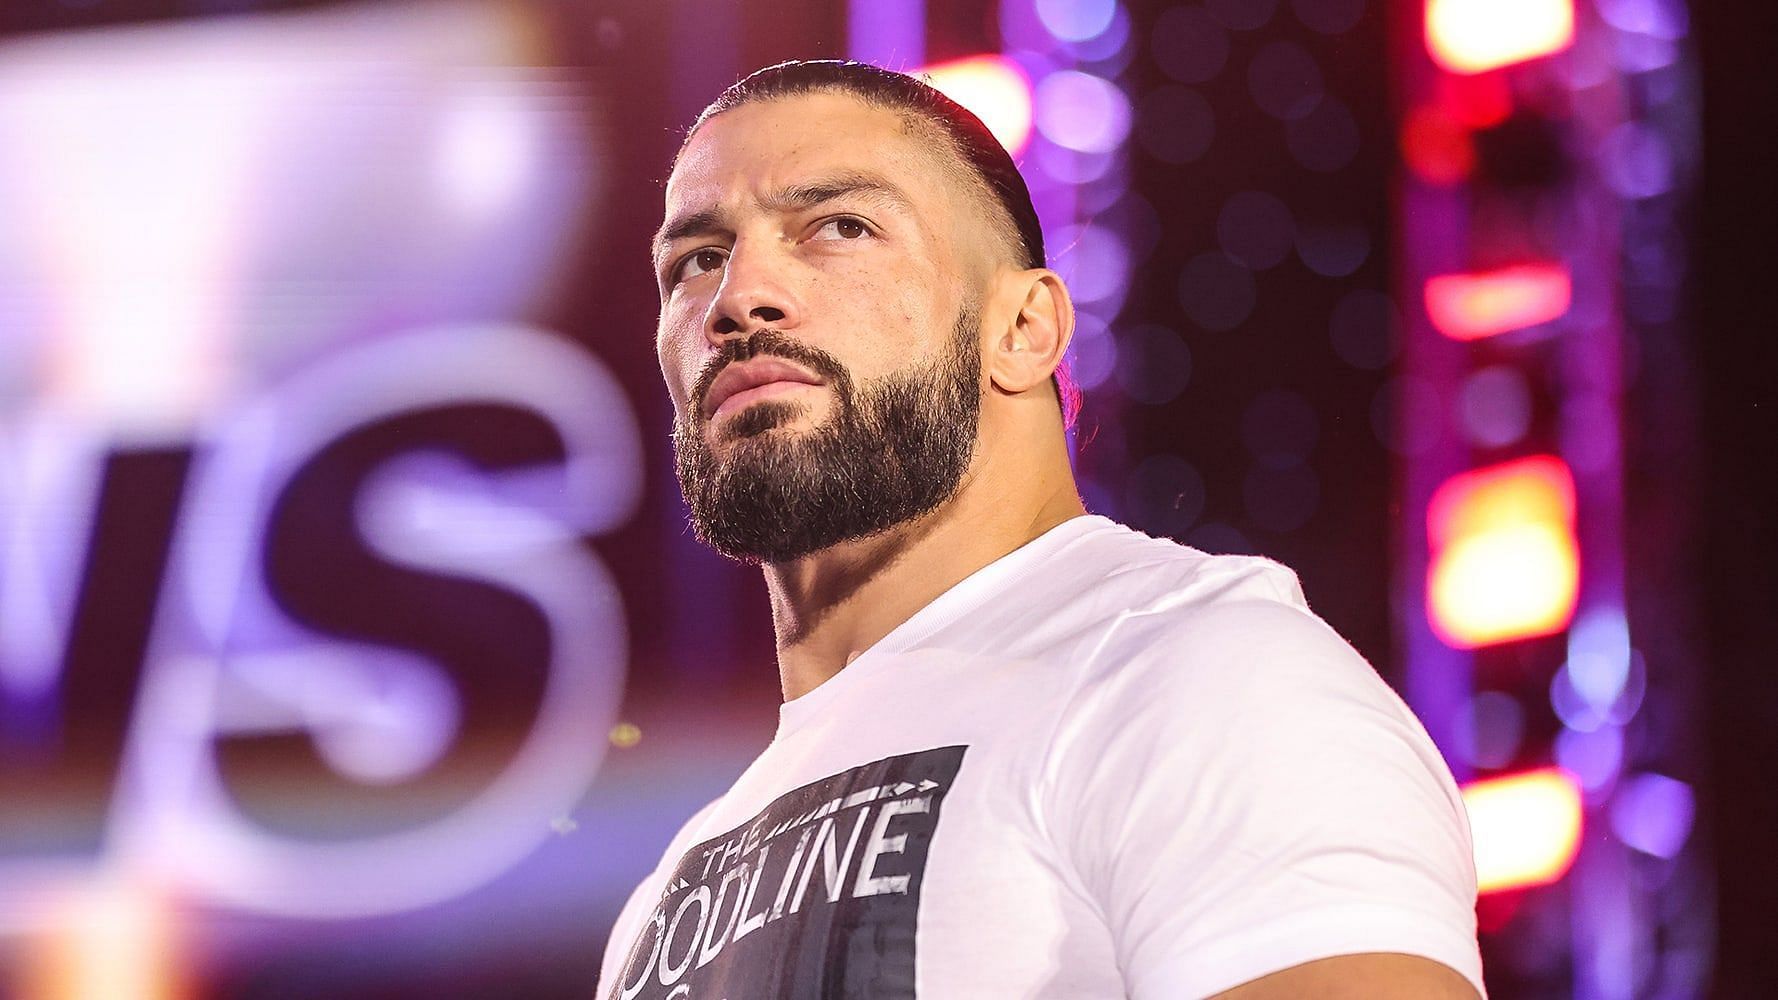 Reigns is no longer a full-time fighting champion